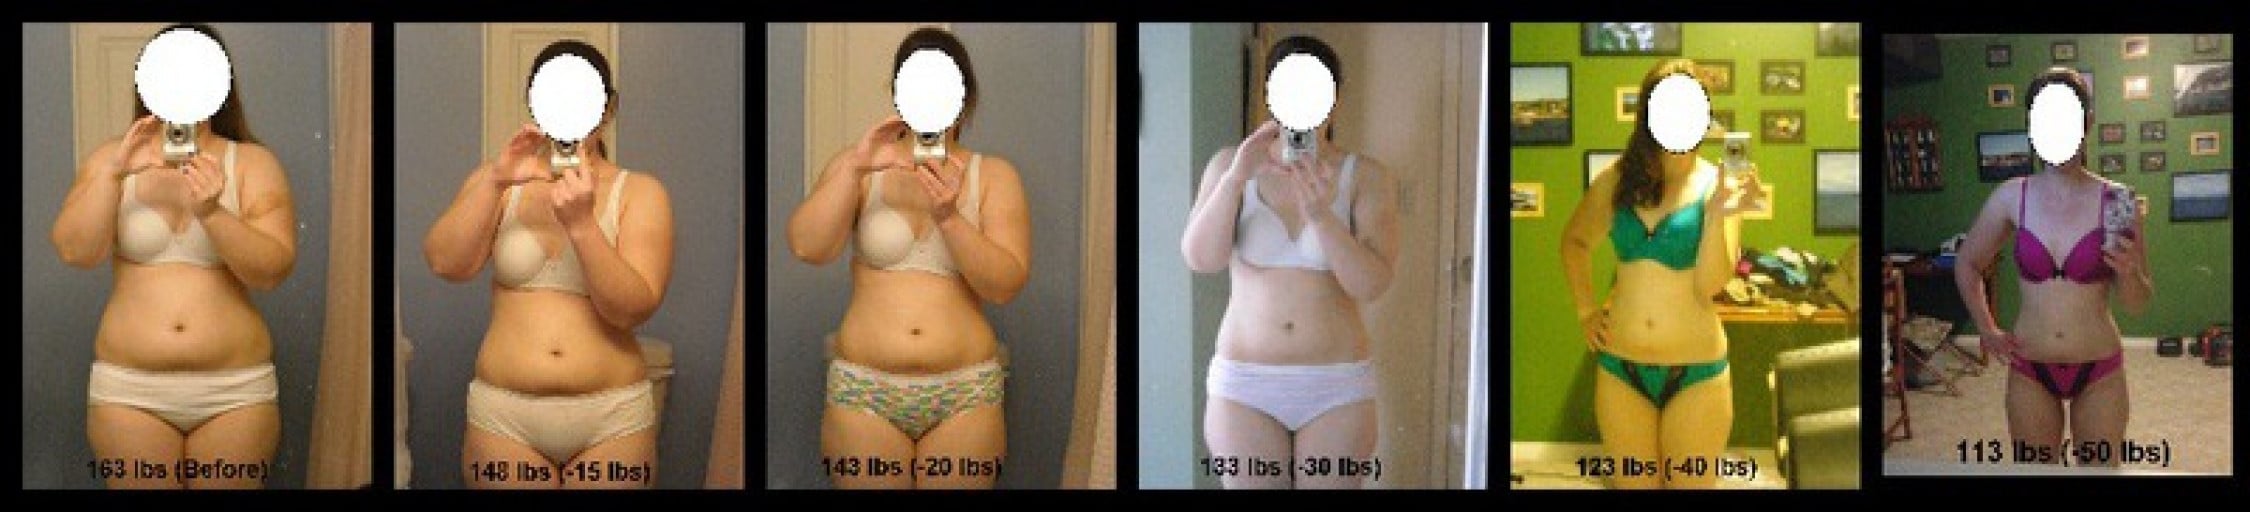 A photo of a 5'0" woman showing a weight cut from 163 pounds to 123 pounds. A net loss of 40 pounds.